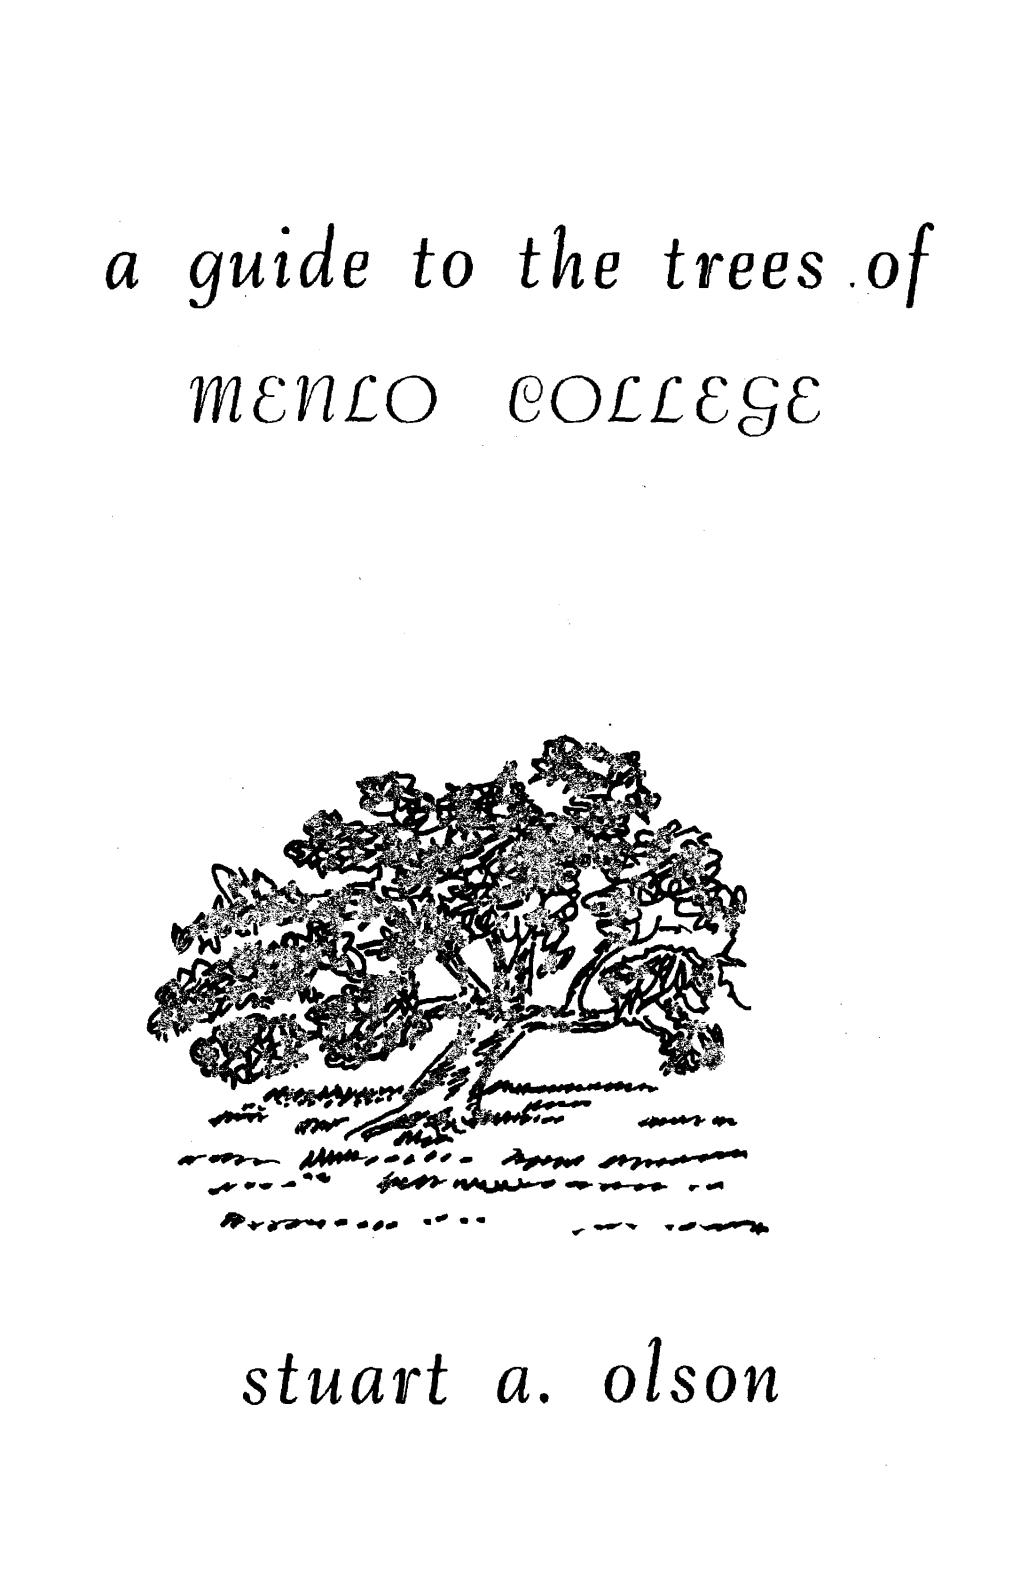 A Guide to the Trees of Menlo College